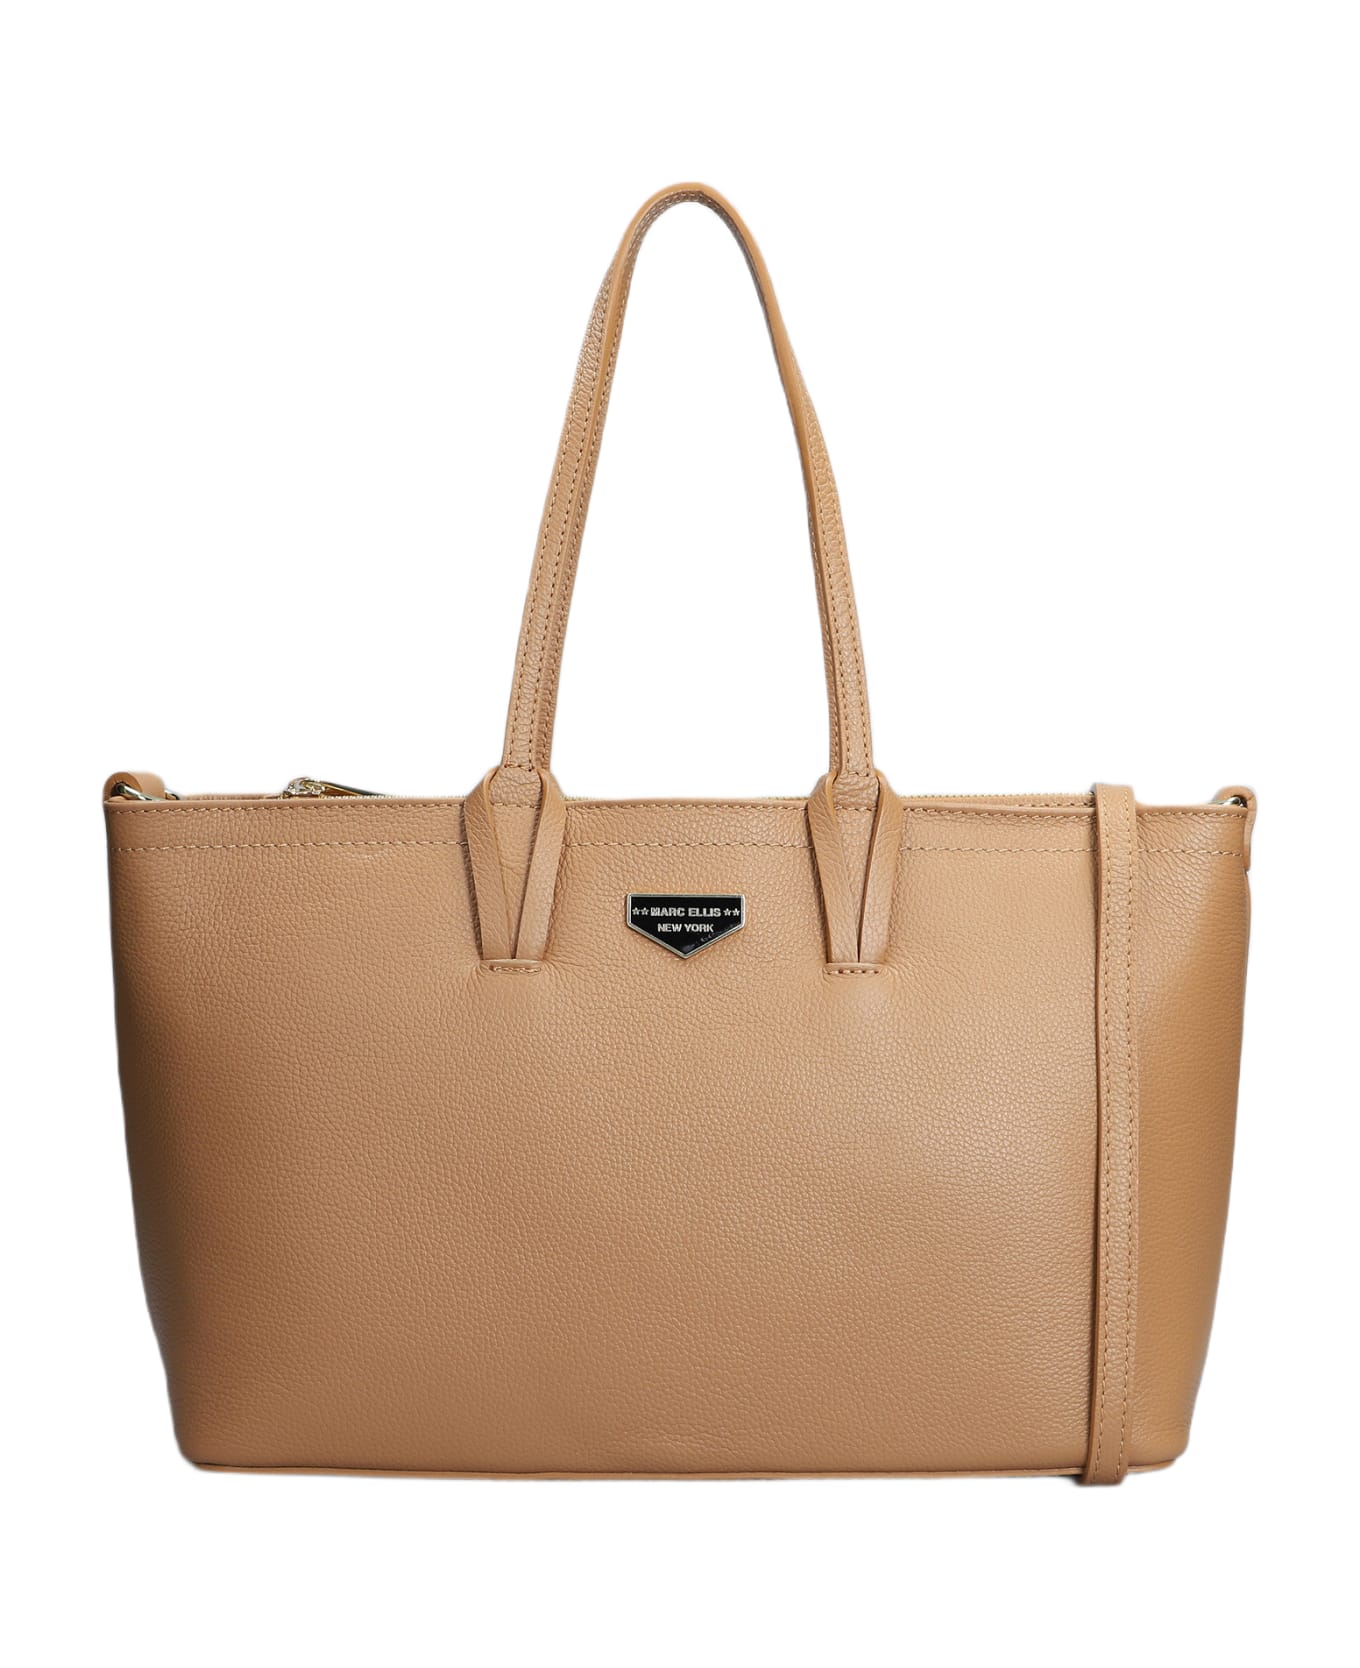 Marc Ellis Marlee Do Tote In Leather Color Leather - leather color